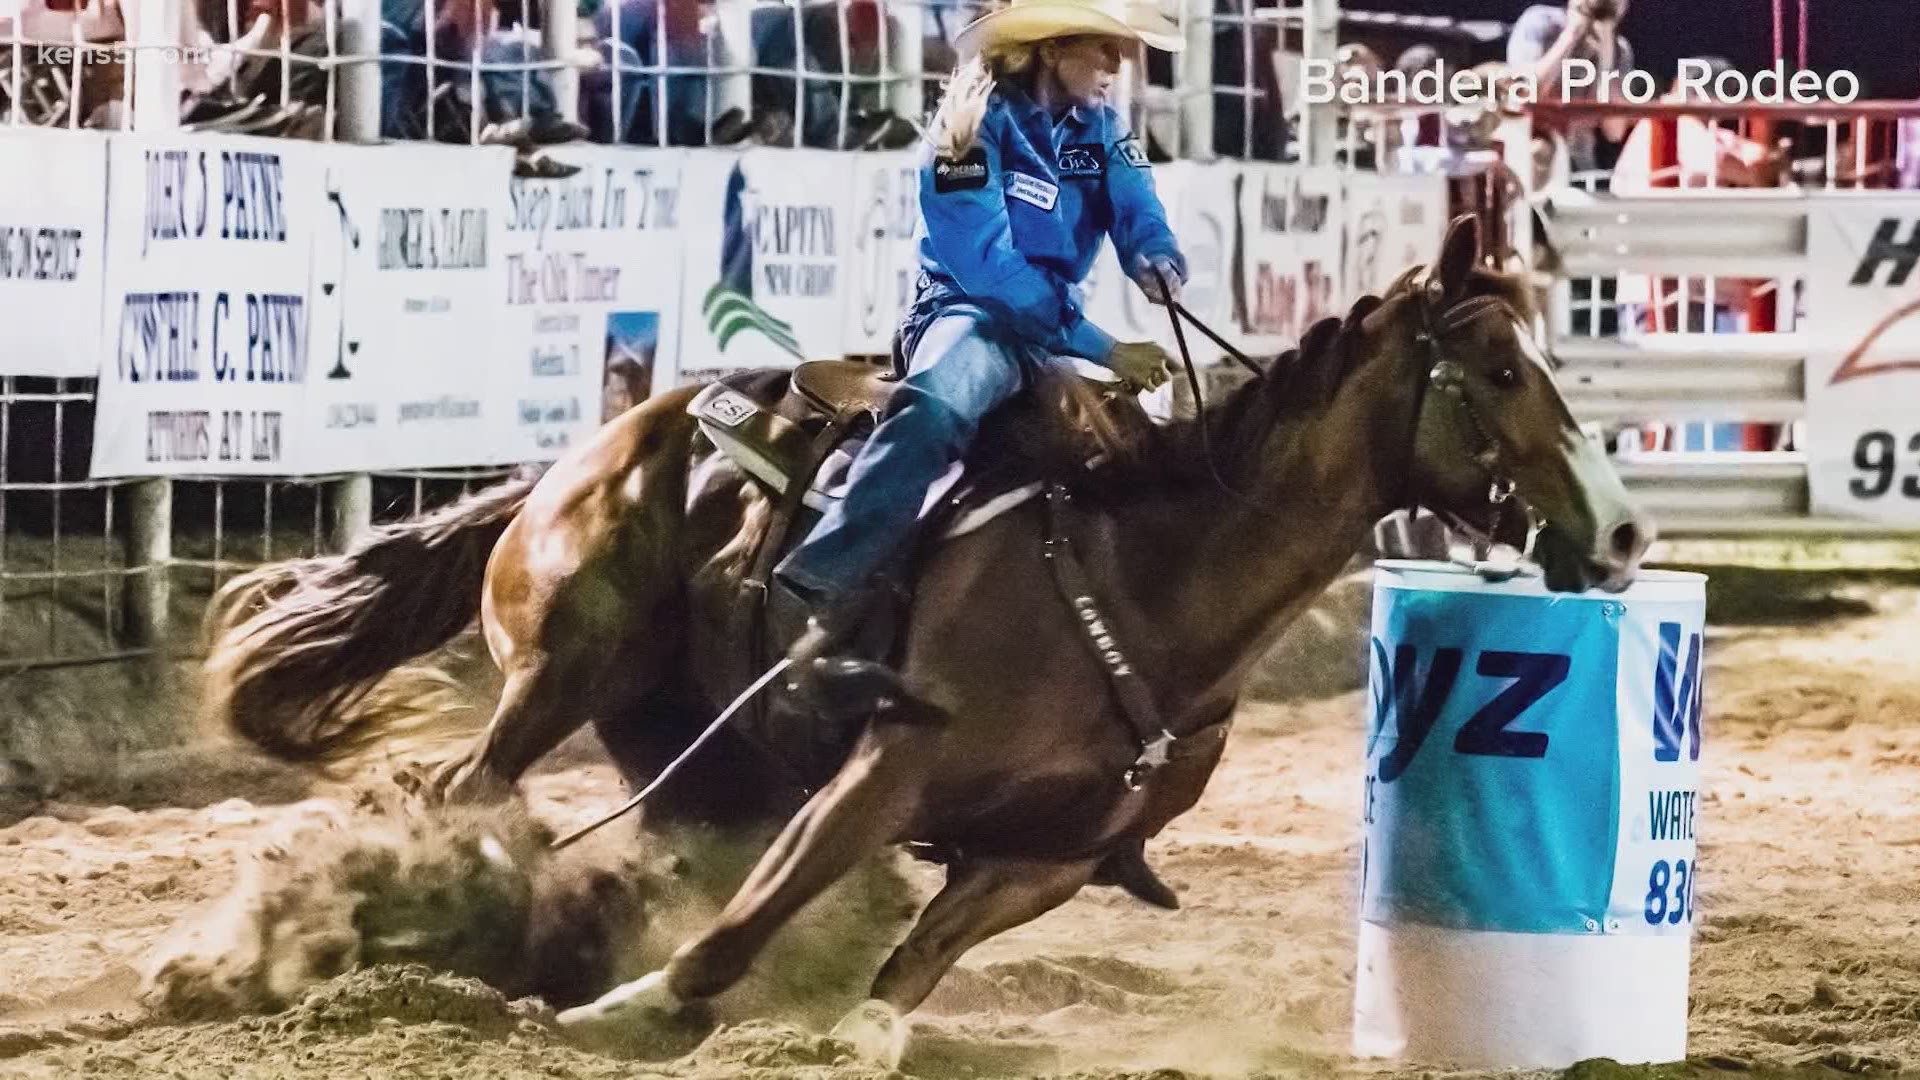 Fewer than 1,000 people may live in Bandera, Texas, but they're enough to personify the spirit of the rodeo.